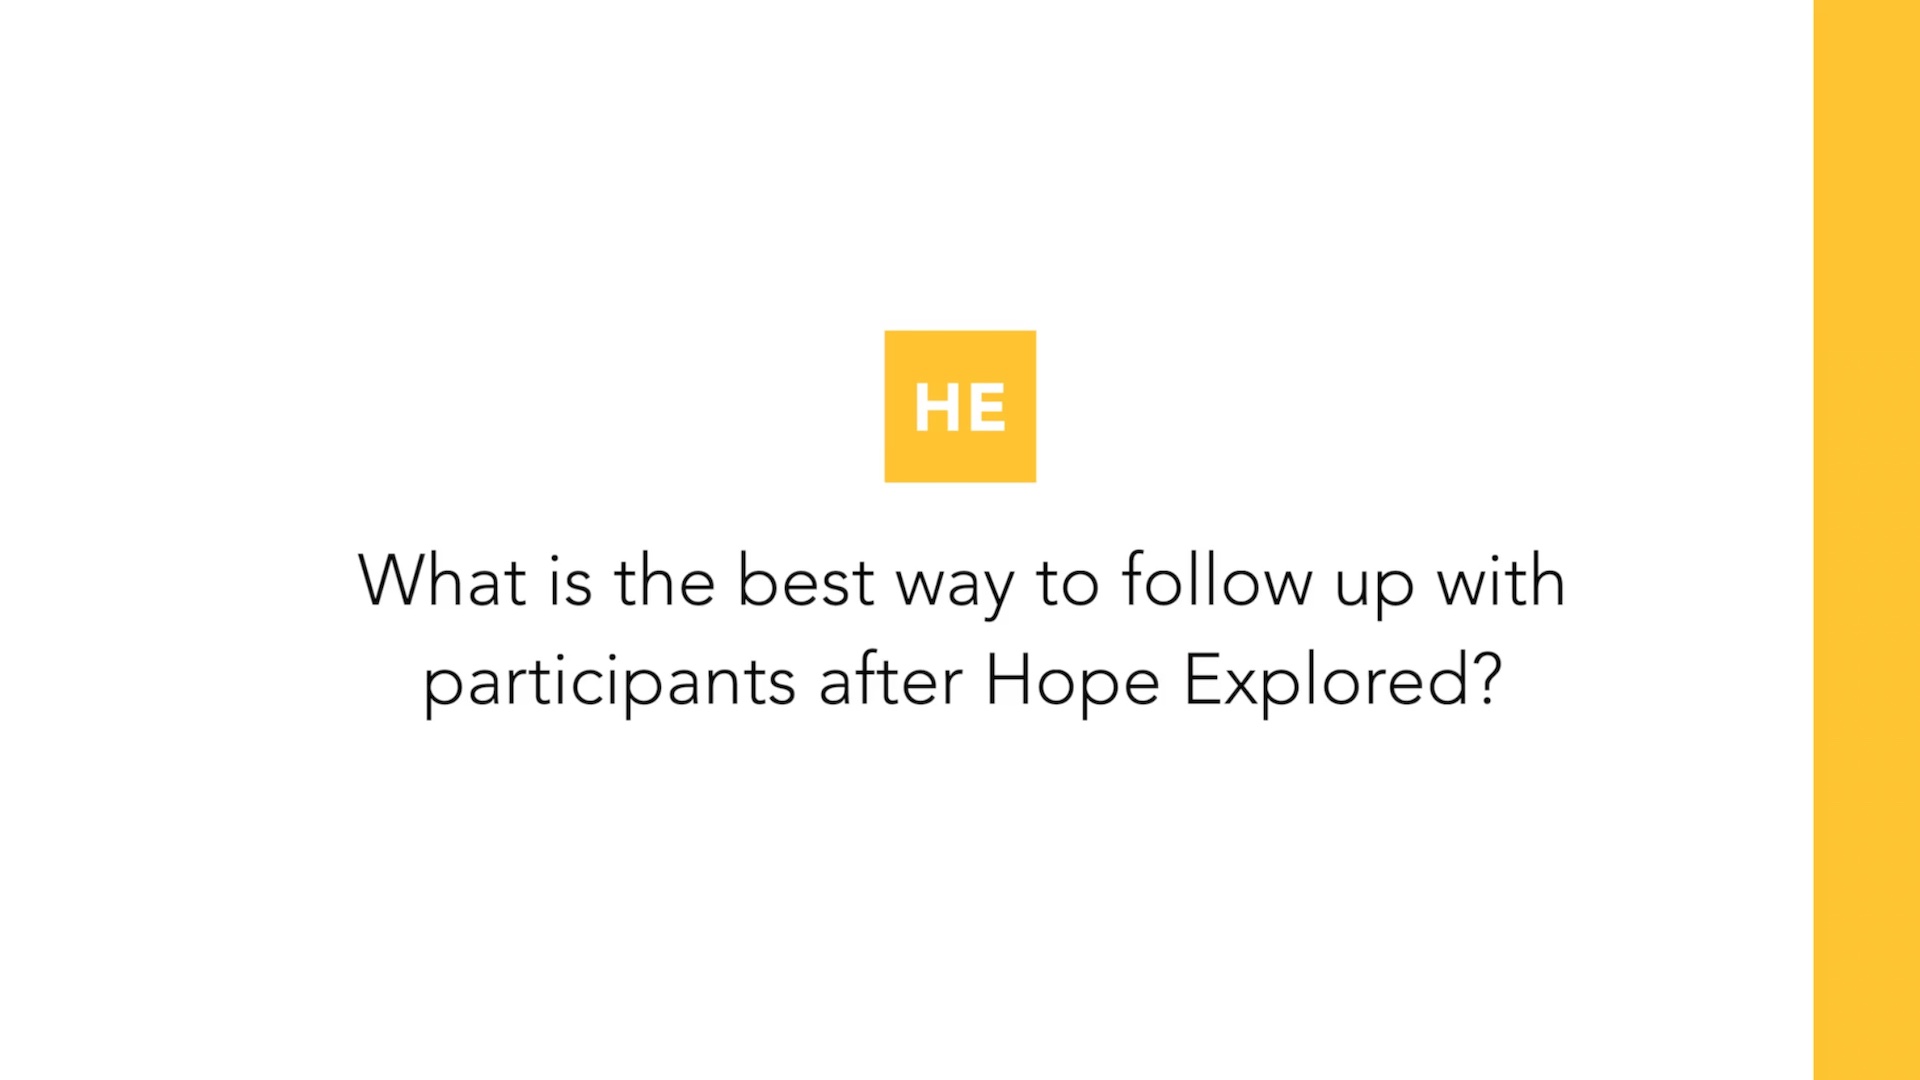 What is the best way to follow up with participants after Hope Explored?